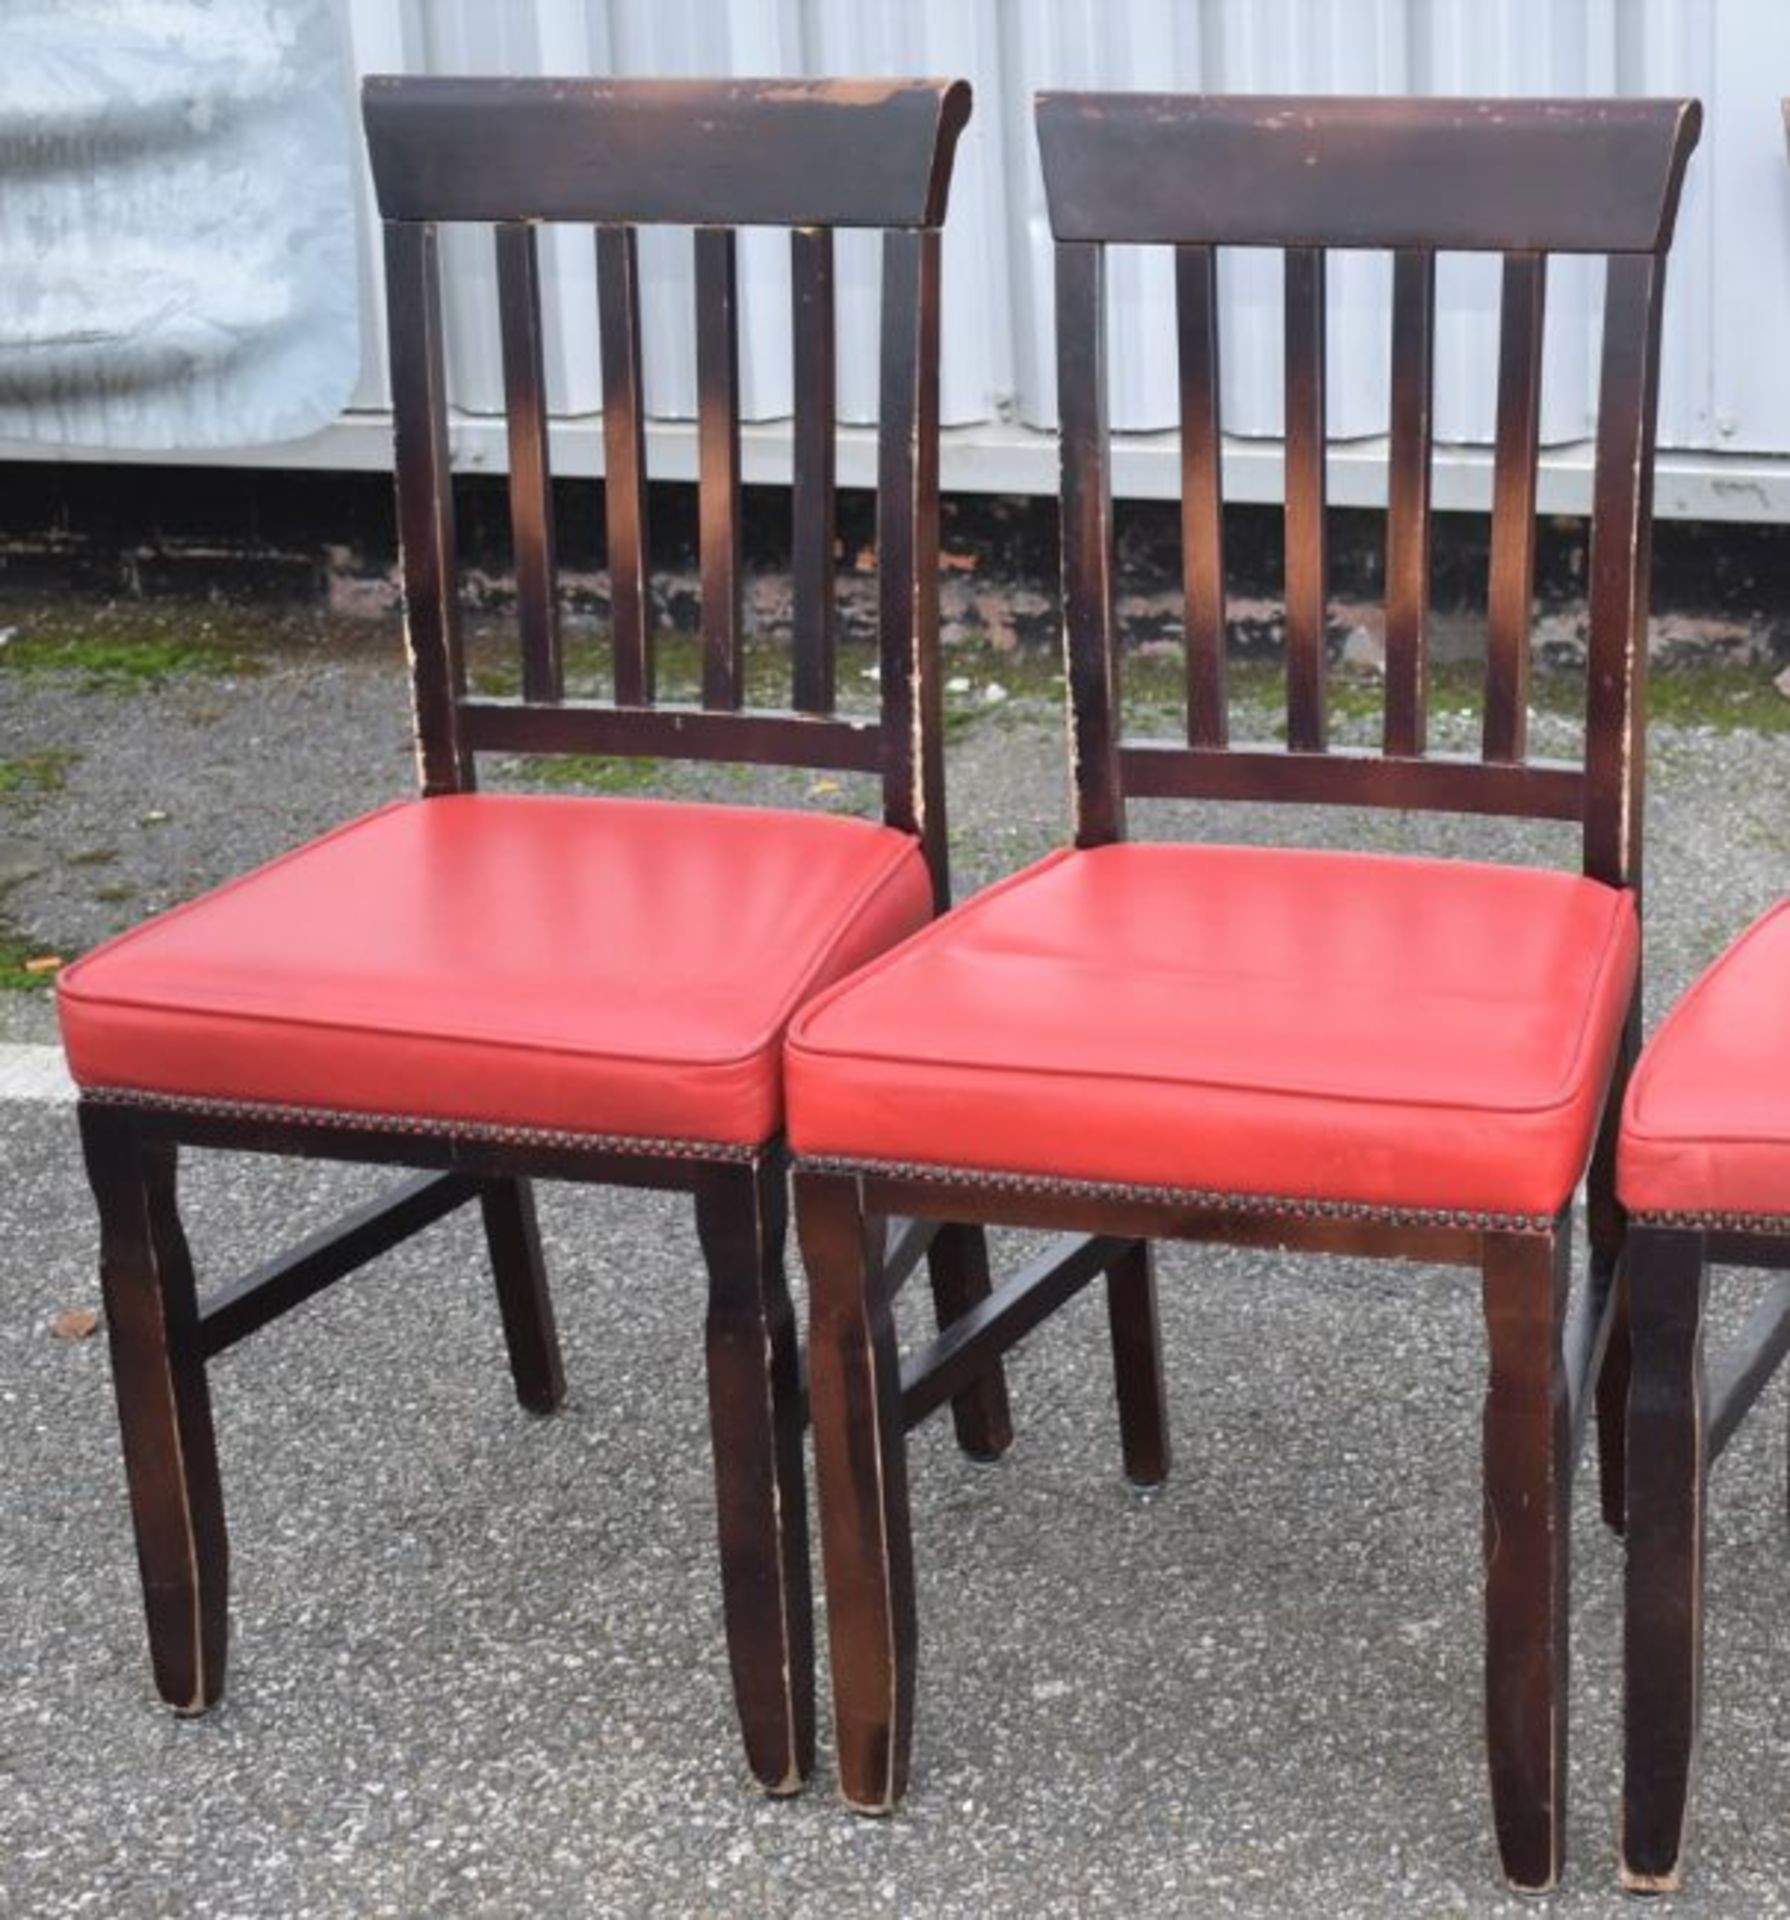 8 x Restaurant Dining Chairs With Dark Stained Wood Finish and Red Leather Seat Pads - Recently - Image 3 of 6